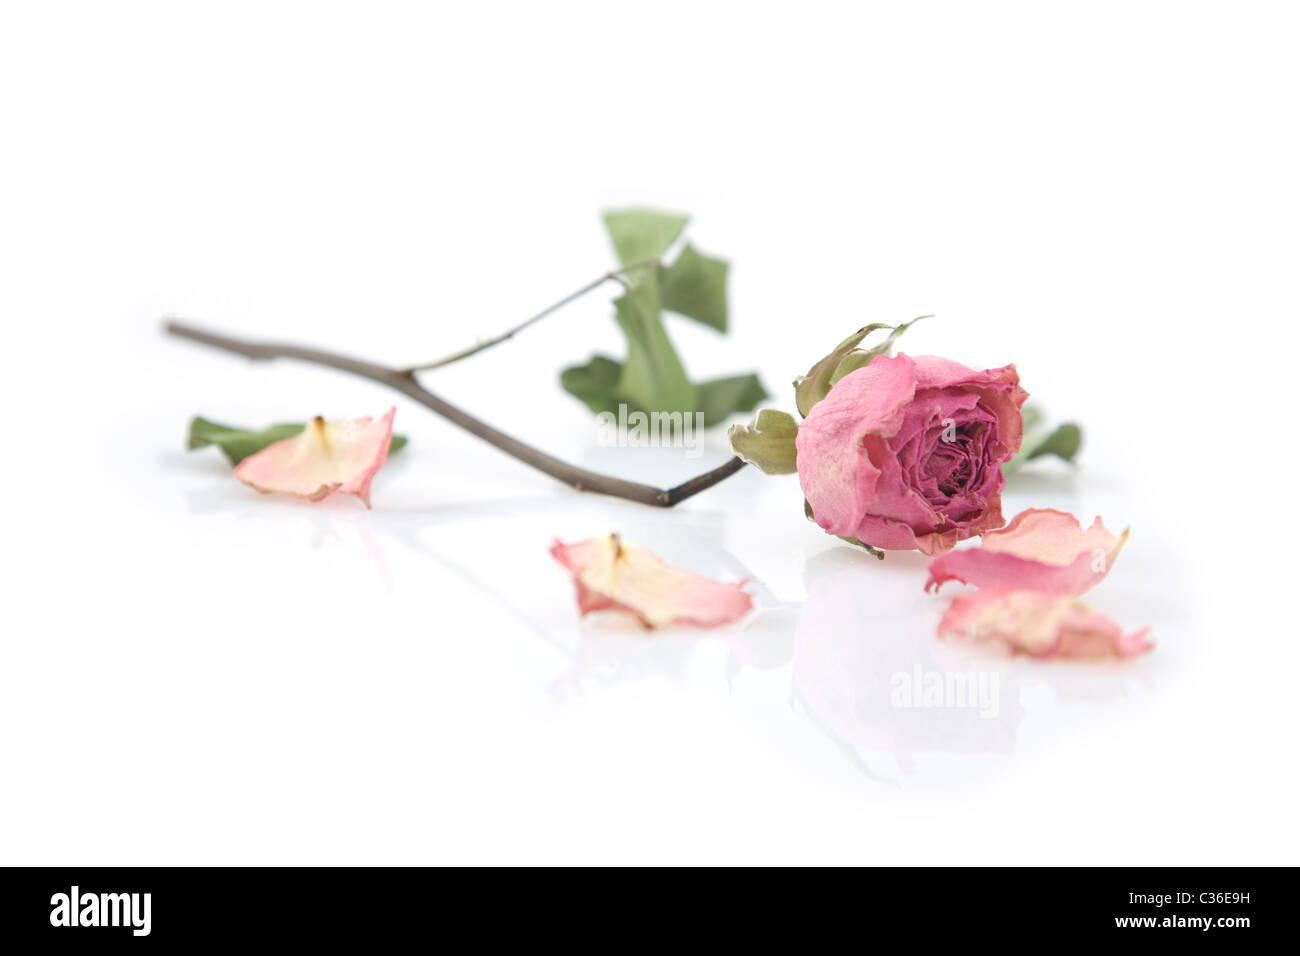 Close up of a single dried pink rose on white background Stock Photo